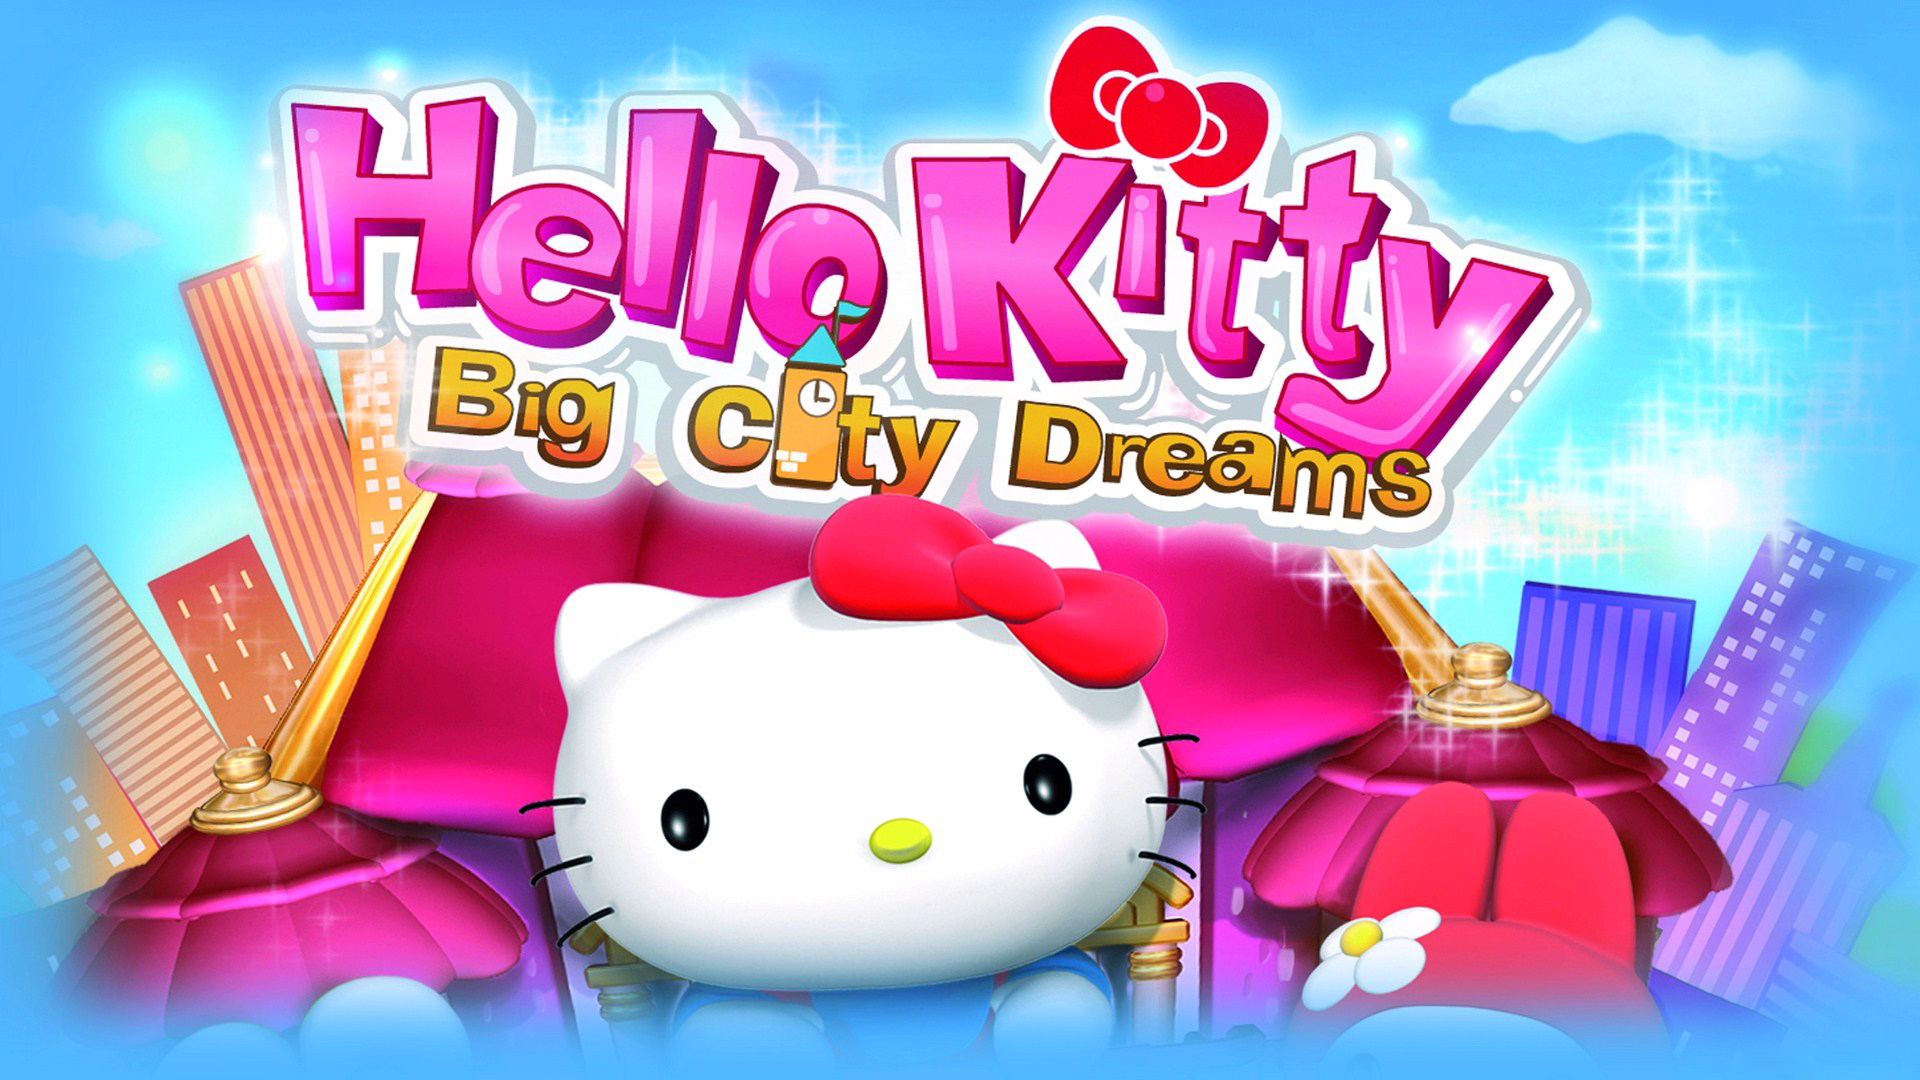 Download Wallpaper Hello Kitty 3d Image Num 46